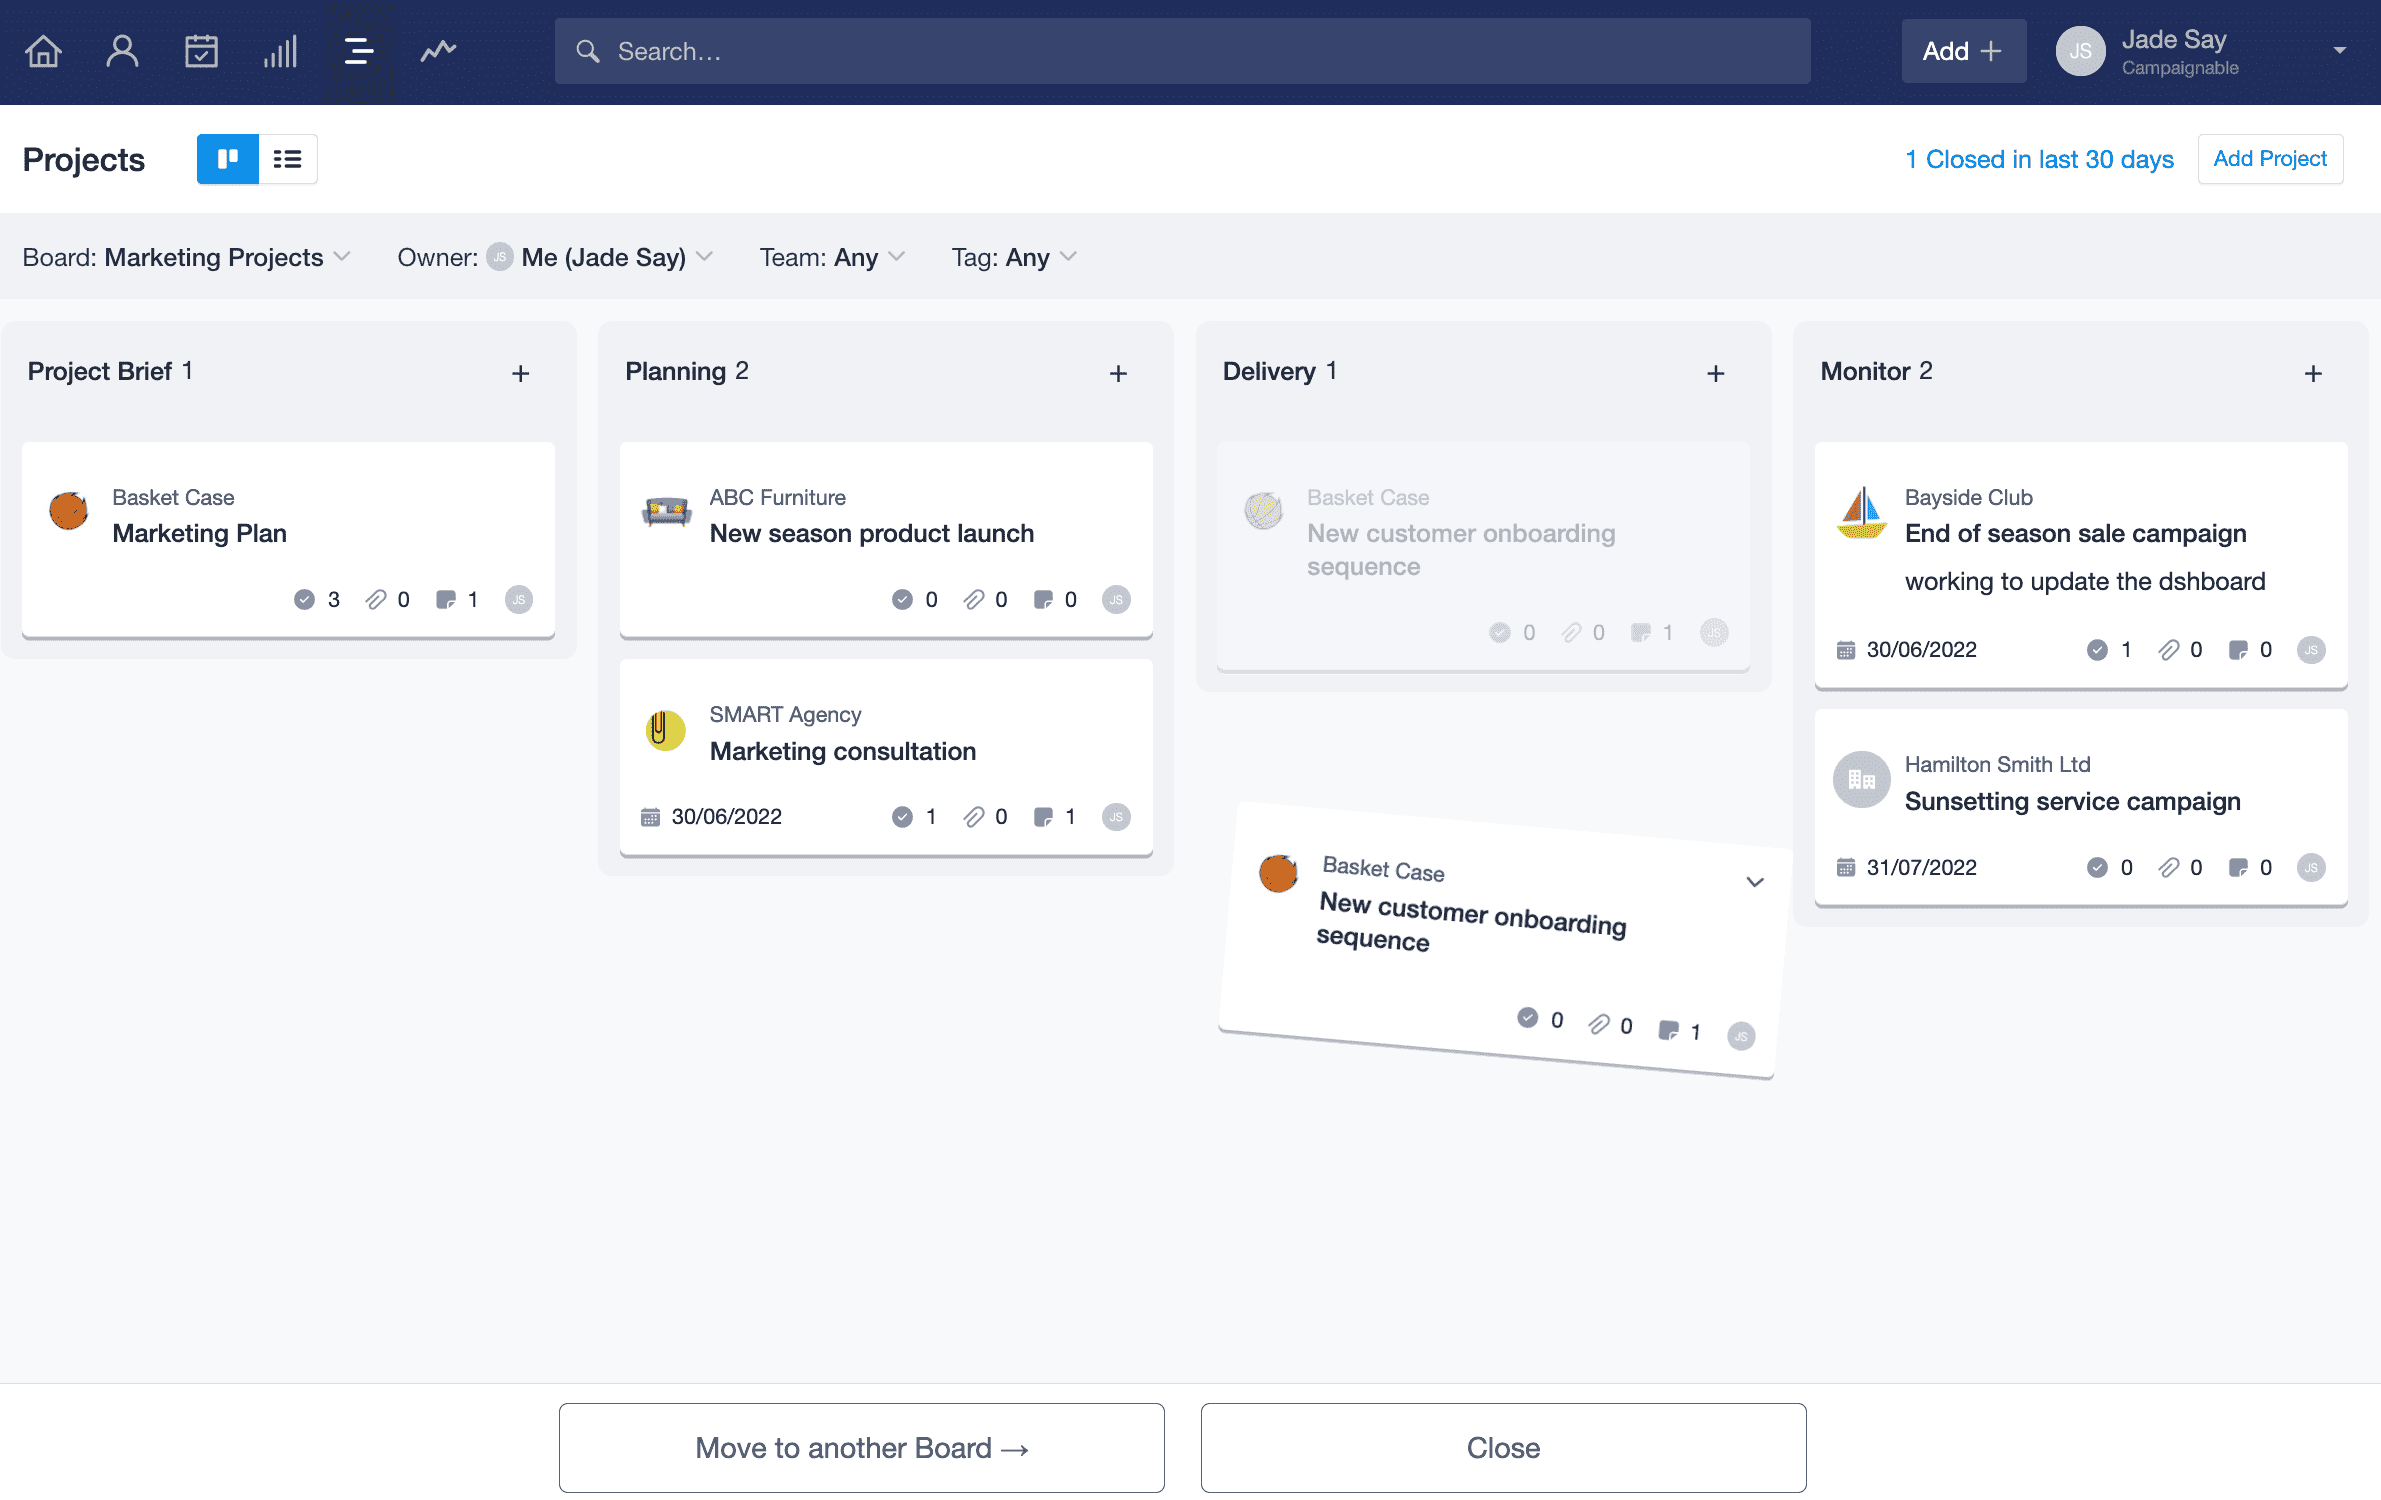 Project kanban view is displayed with a Project card being dragged towards the bottom of the page. Two buttons appear with the option to close the project or move it to another board